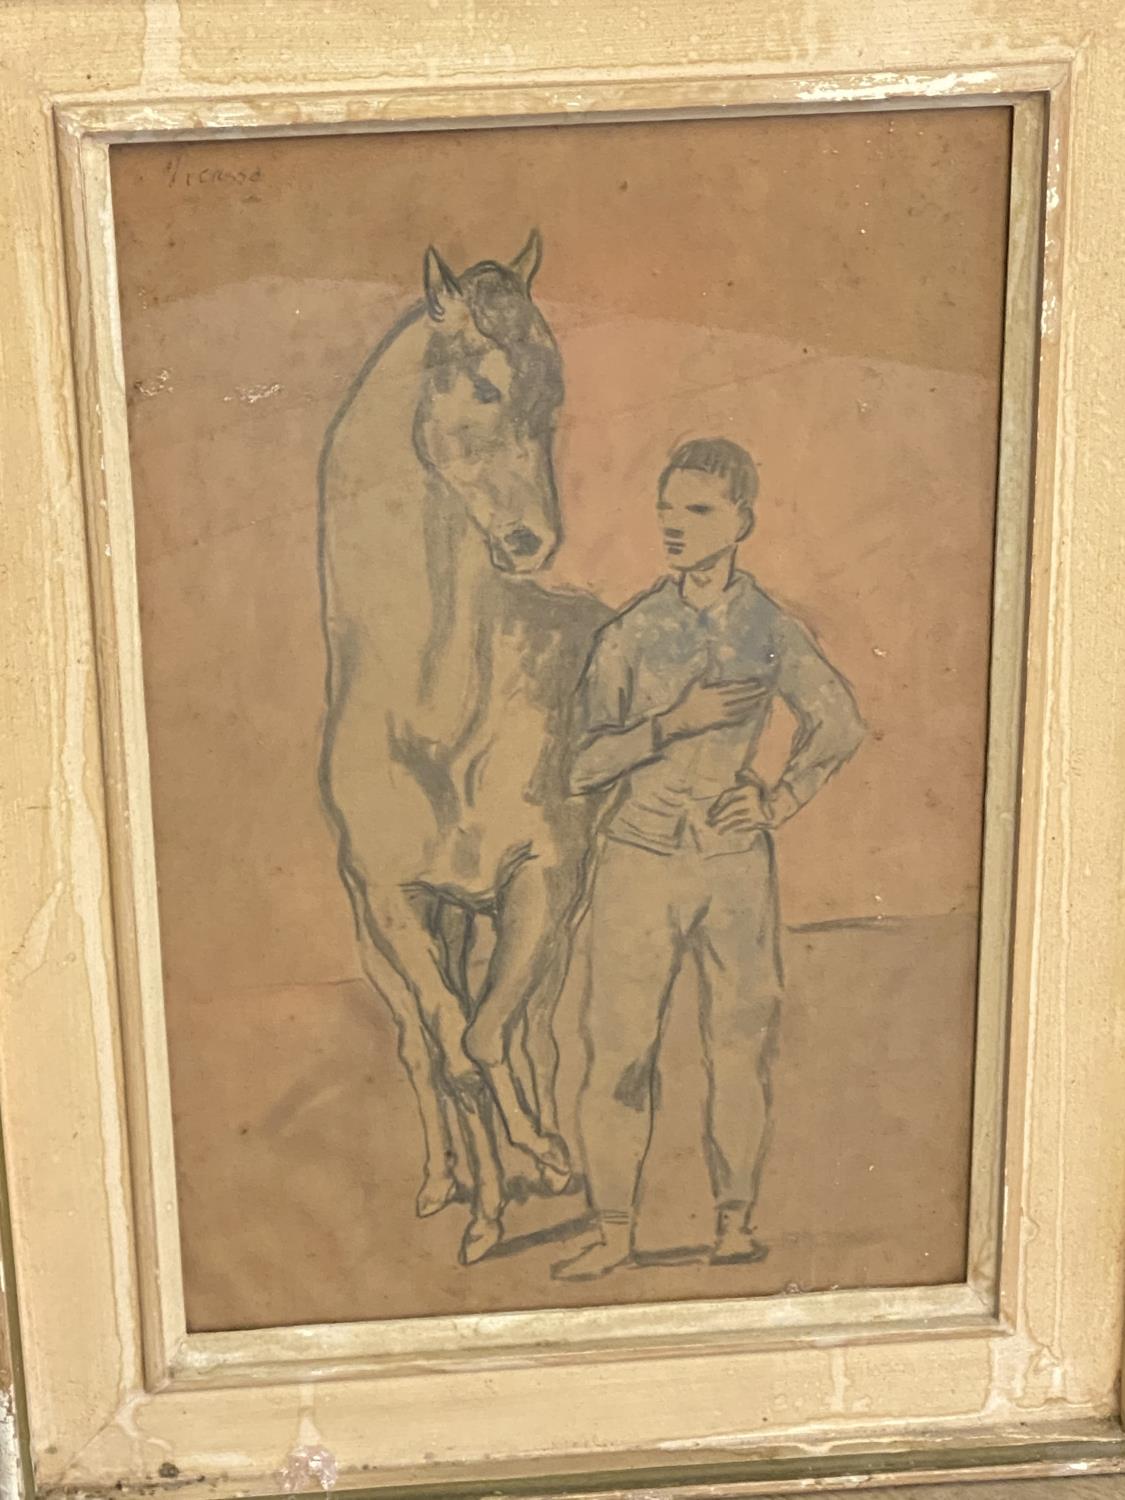 After Picasso, colour print, label Verso, "Jeune homme et Cheval", framed and glazed, and a modern - Image 3 of 13